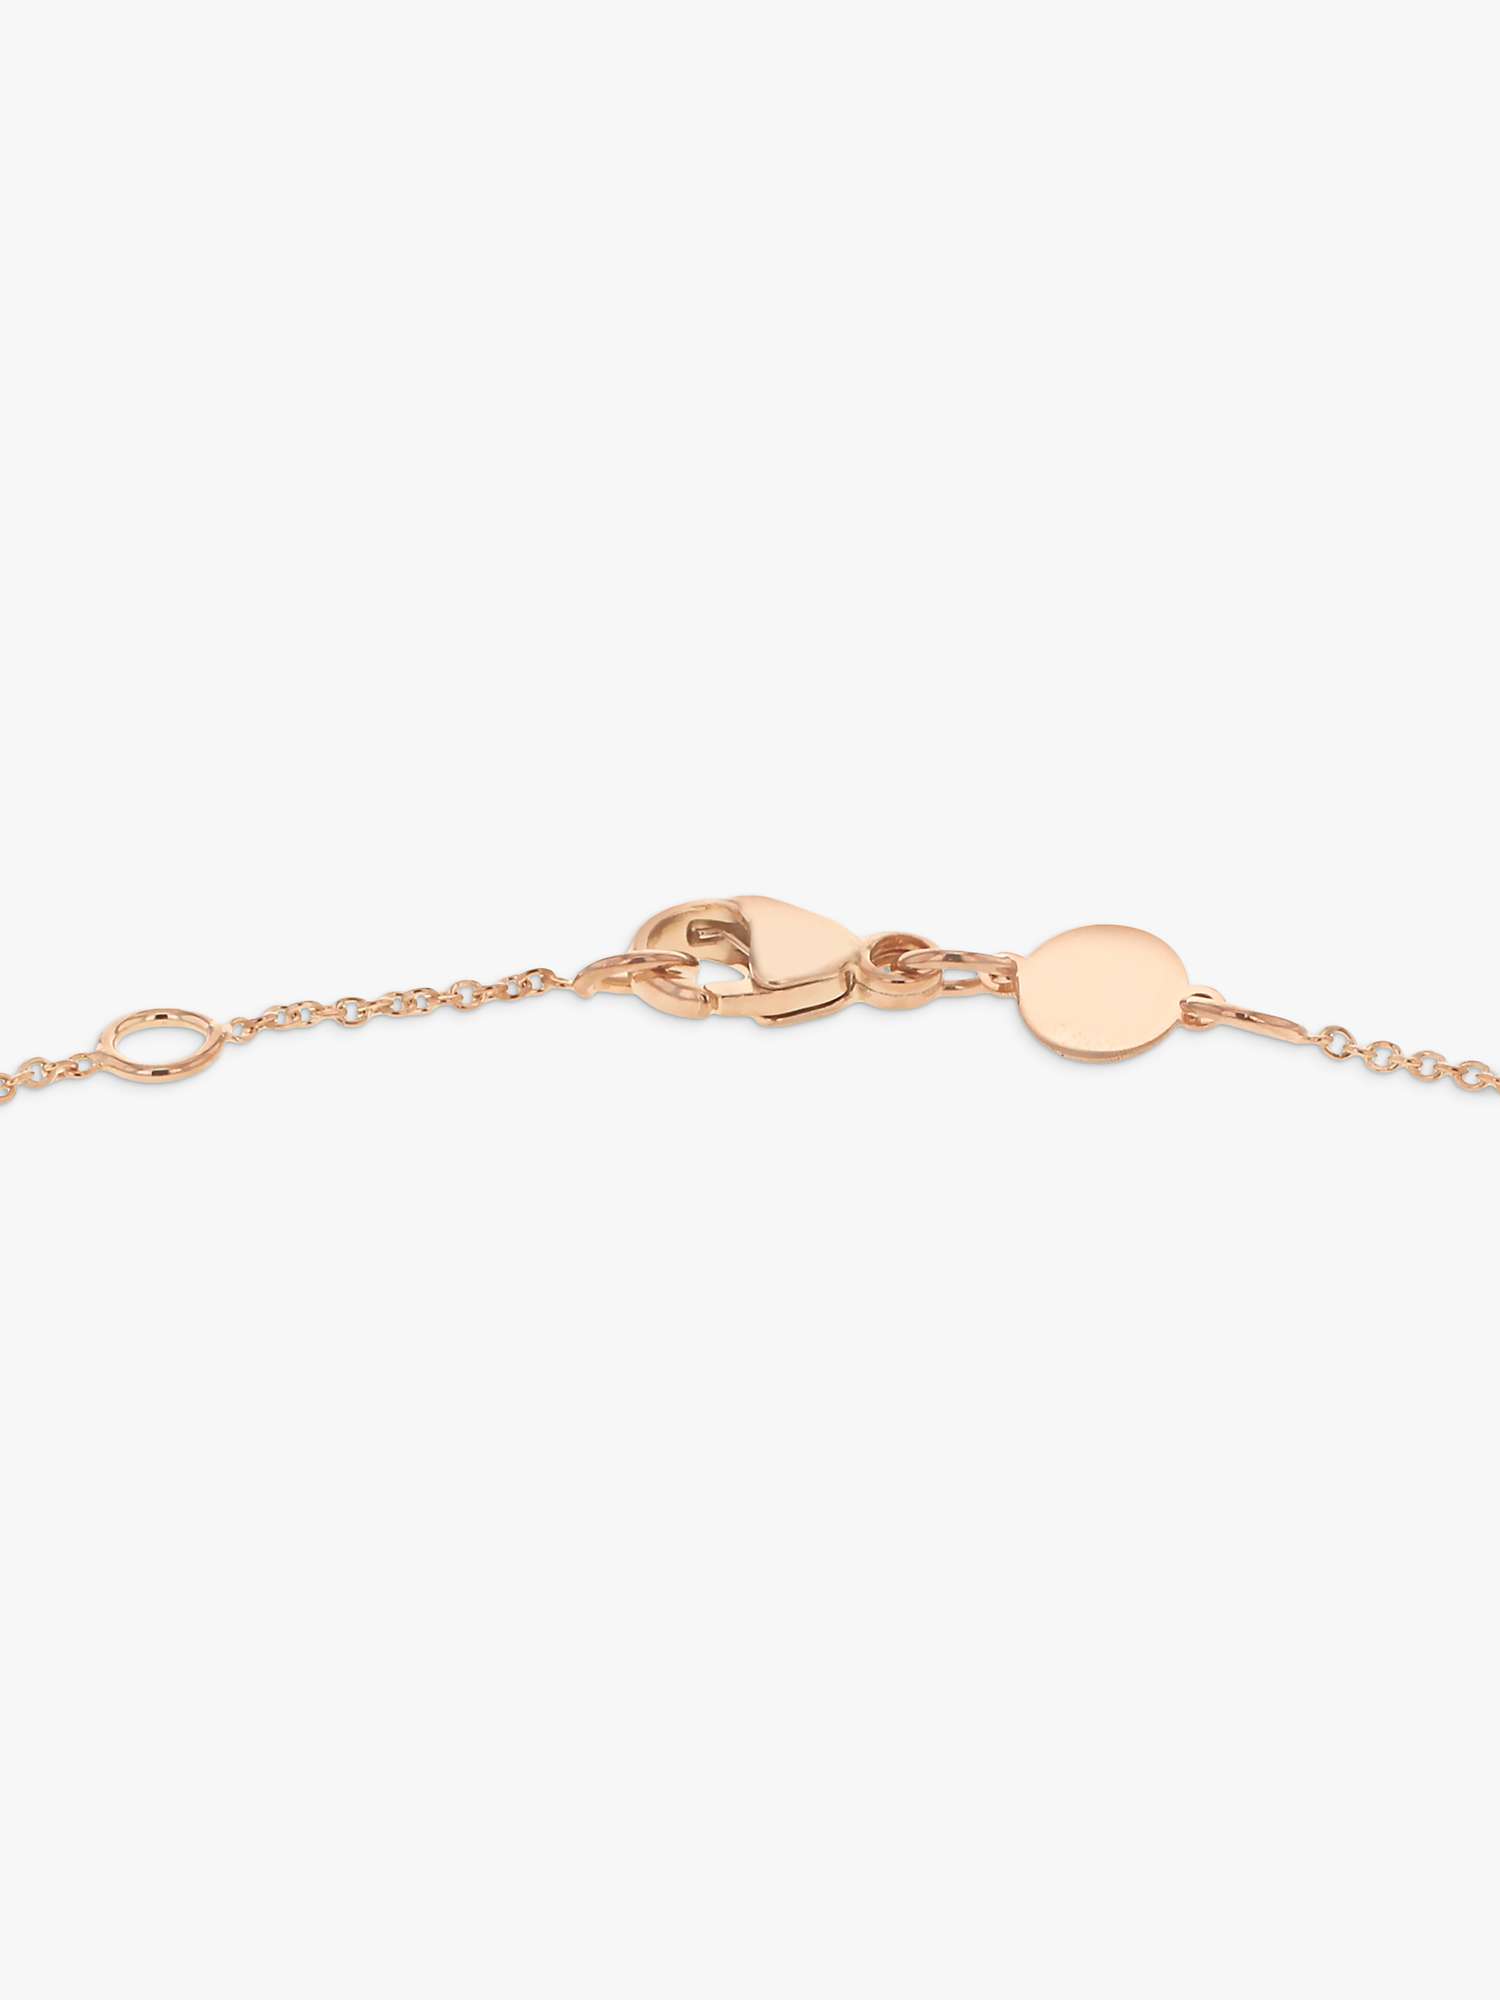 Buy IBB Personalised 9ct Rose Gold Disc Initial Chain Bracelet Online at johnlewis.com